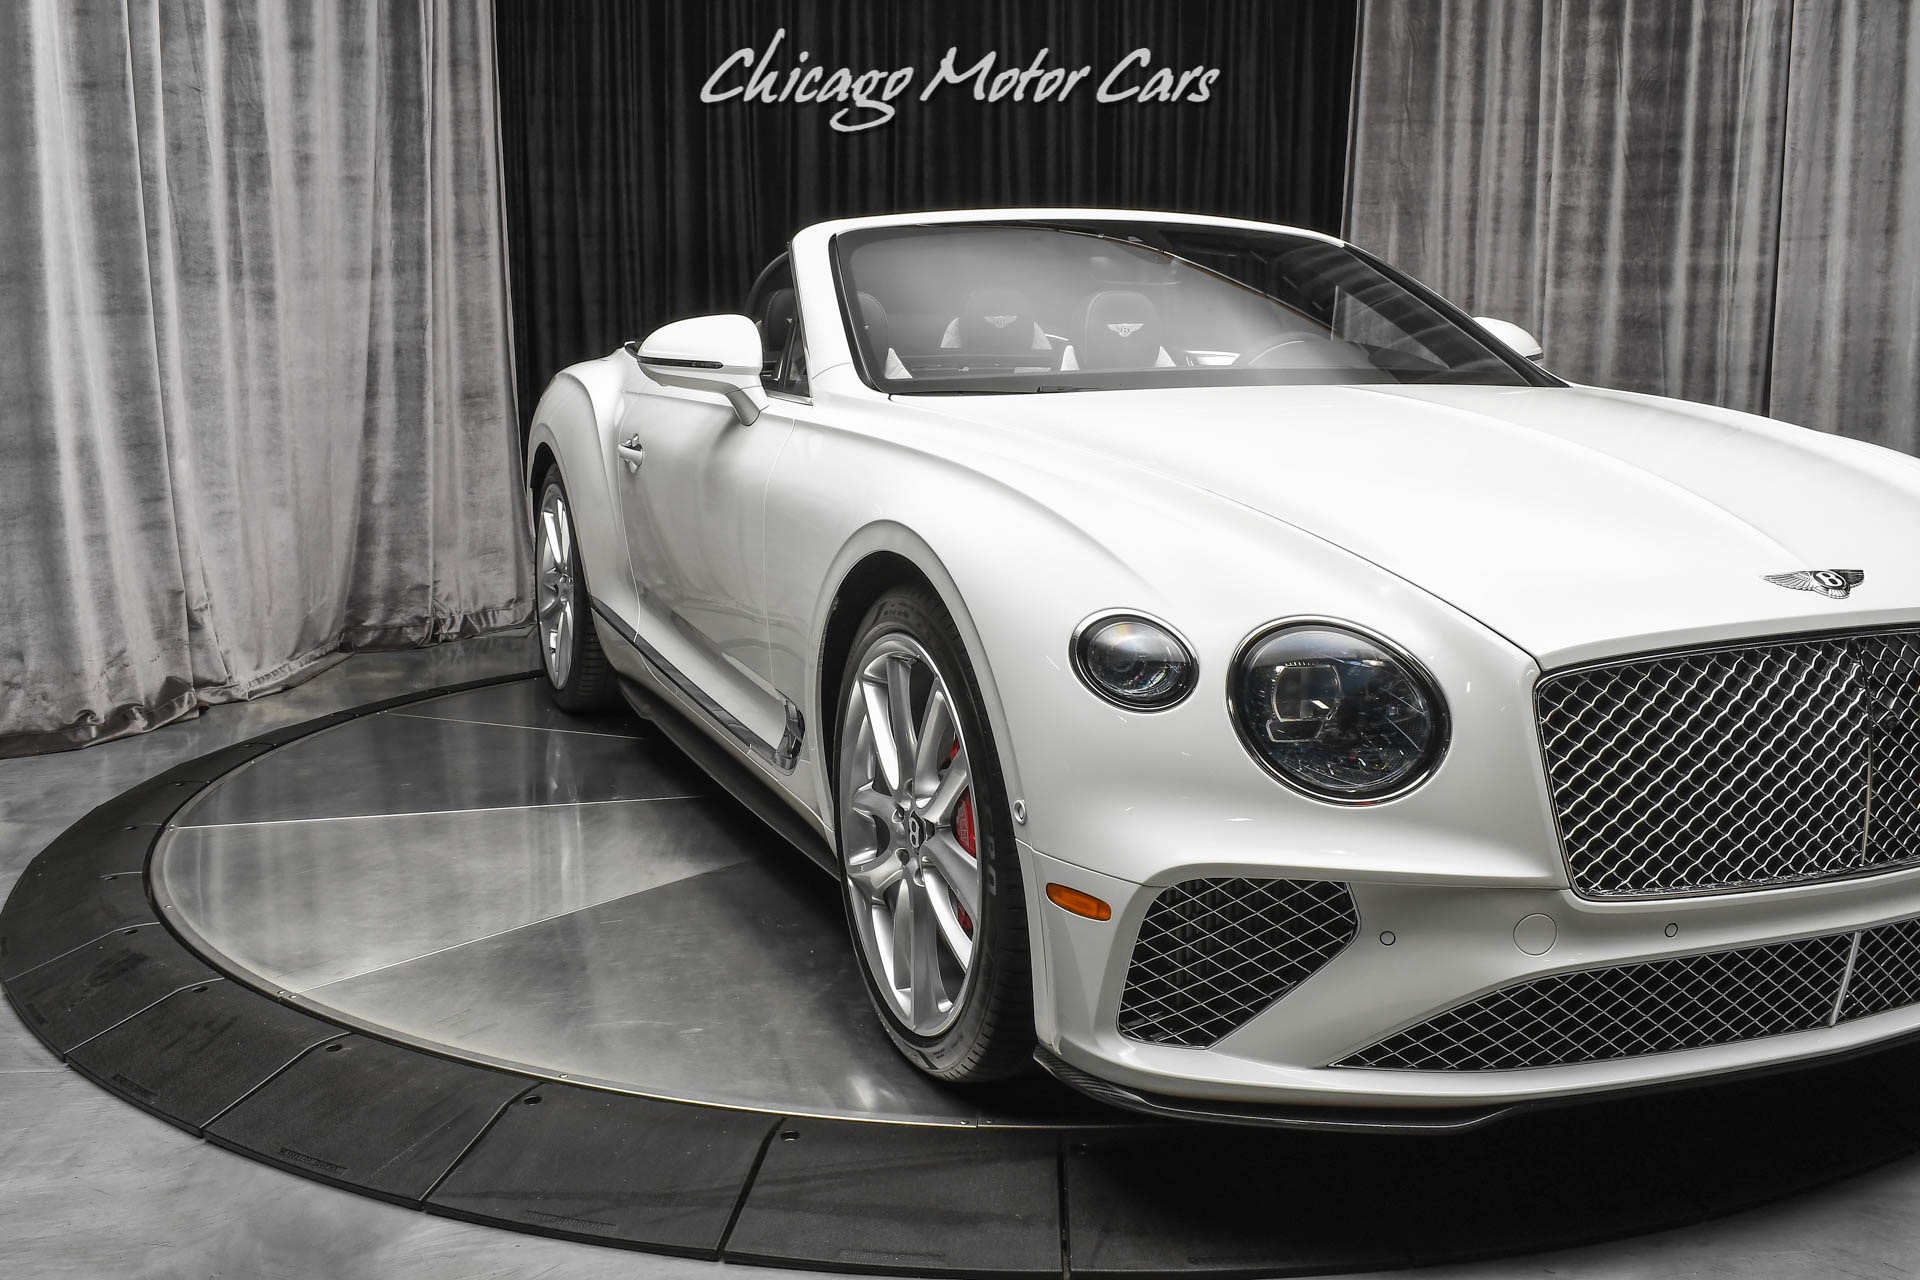 Used-2020-Bentley-Continental-W12-GT-GTC-Convertible-Mulliner-Driving-Spec-Carbon-Fiber-City-Specification